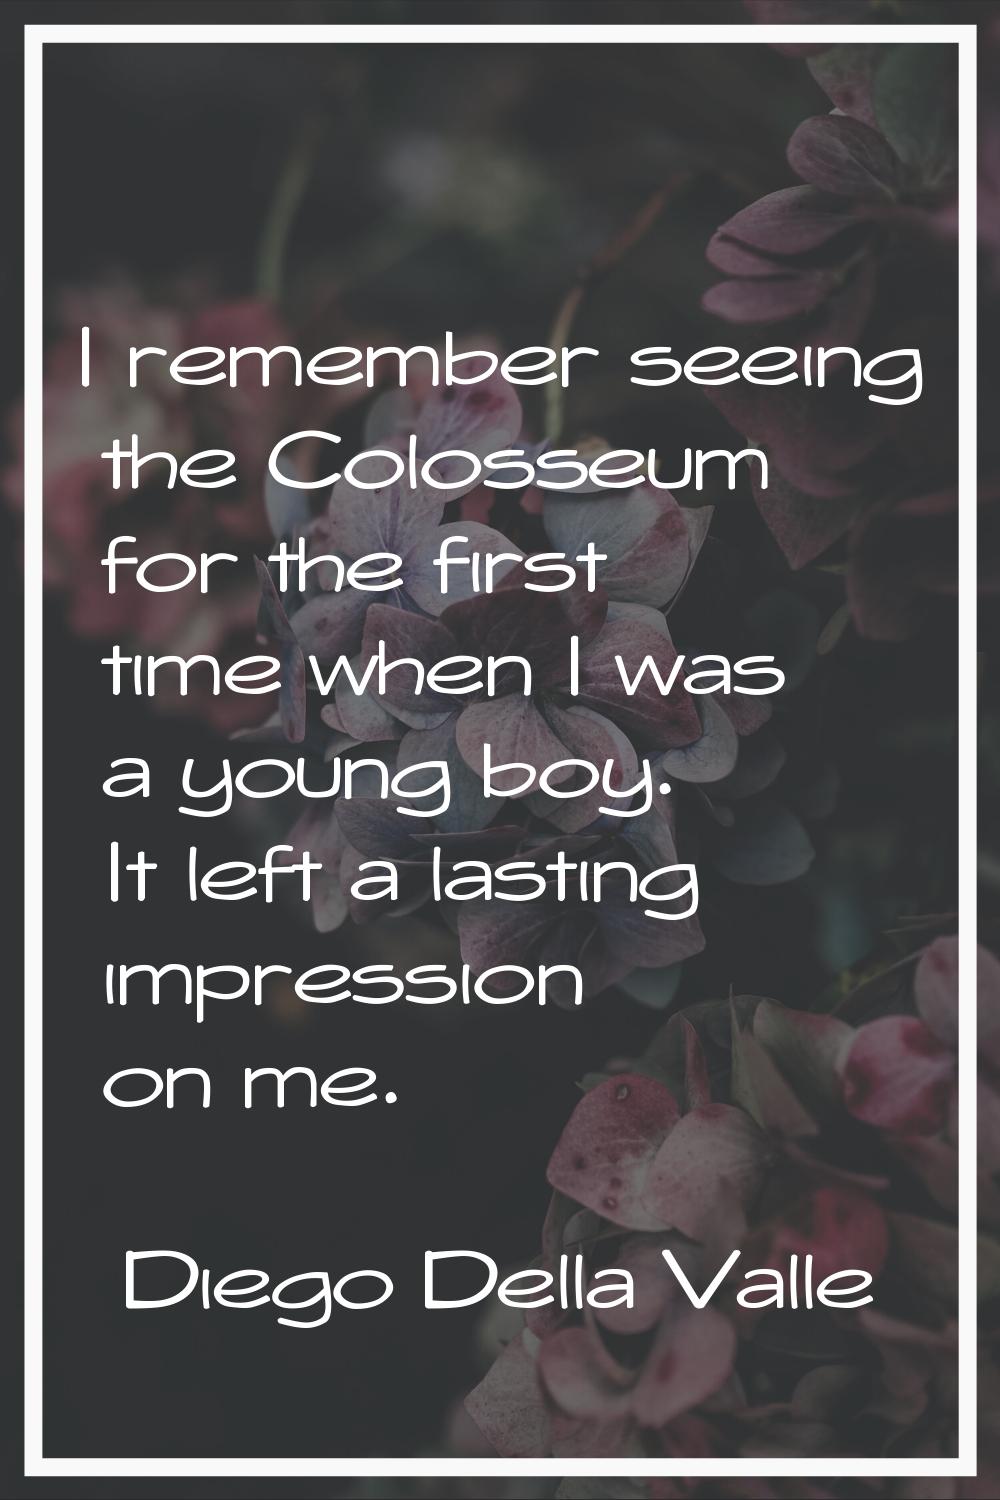 I remember seeing the Colosseum for the first time when I was a young boy. It left a lasting impres